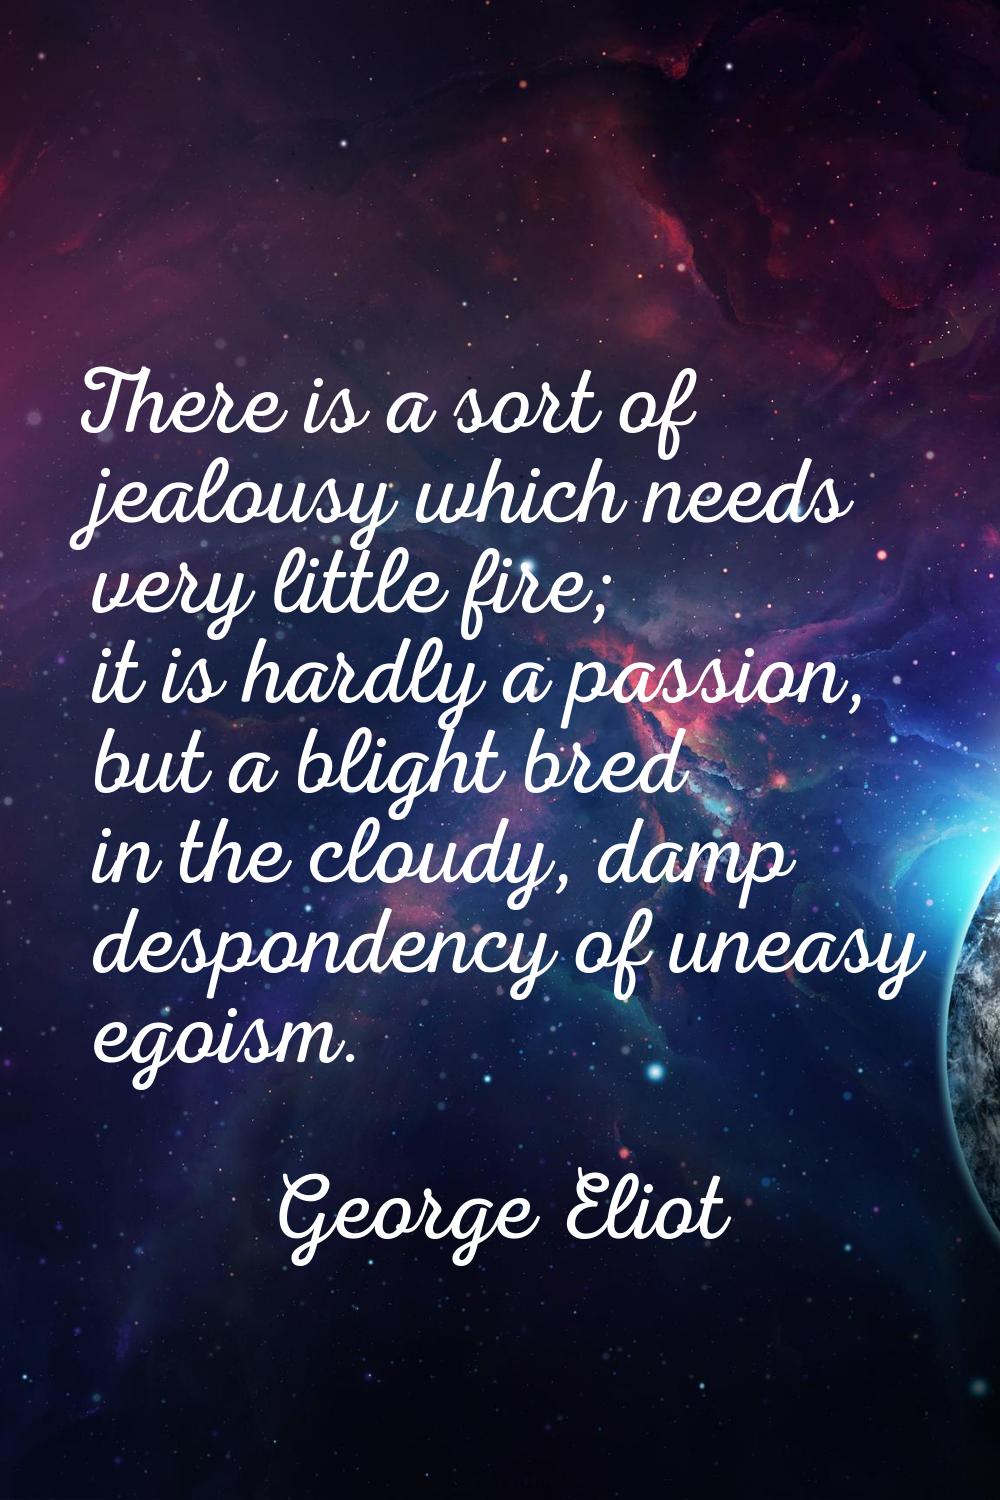 There is a sort of jealousy which needs very little fire; it is hardly a passion, but a blight bred